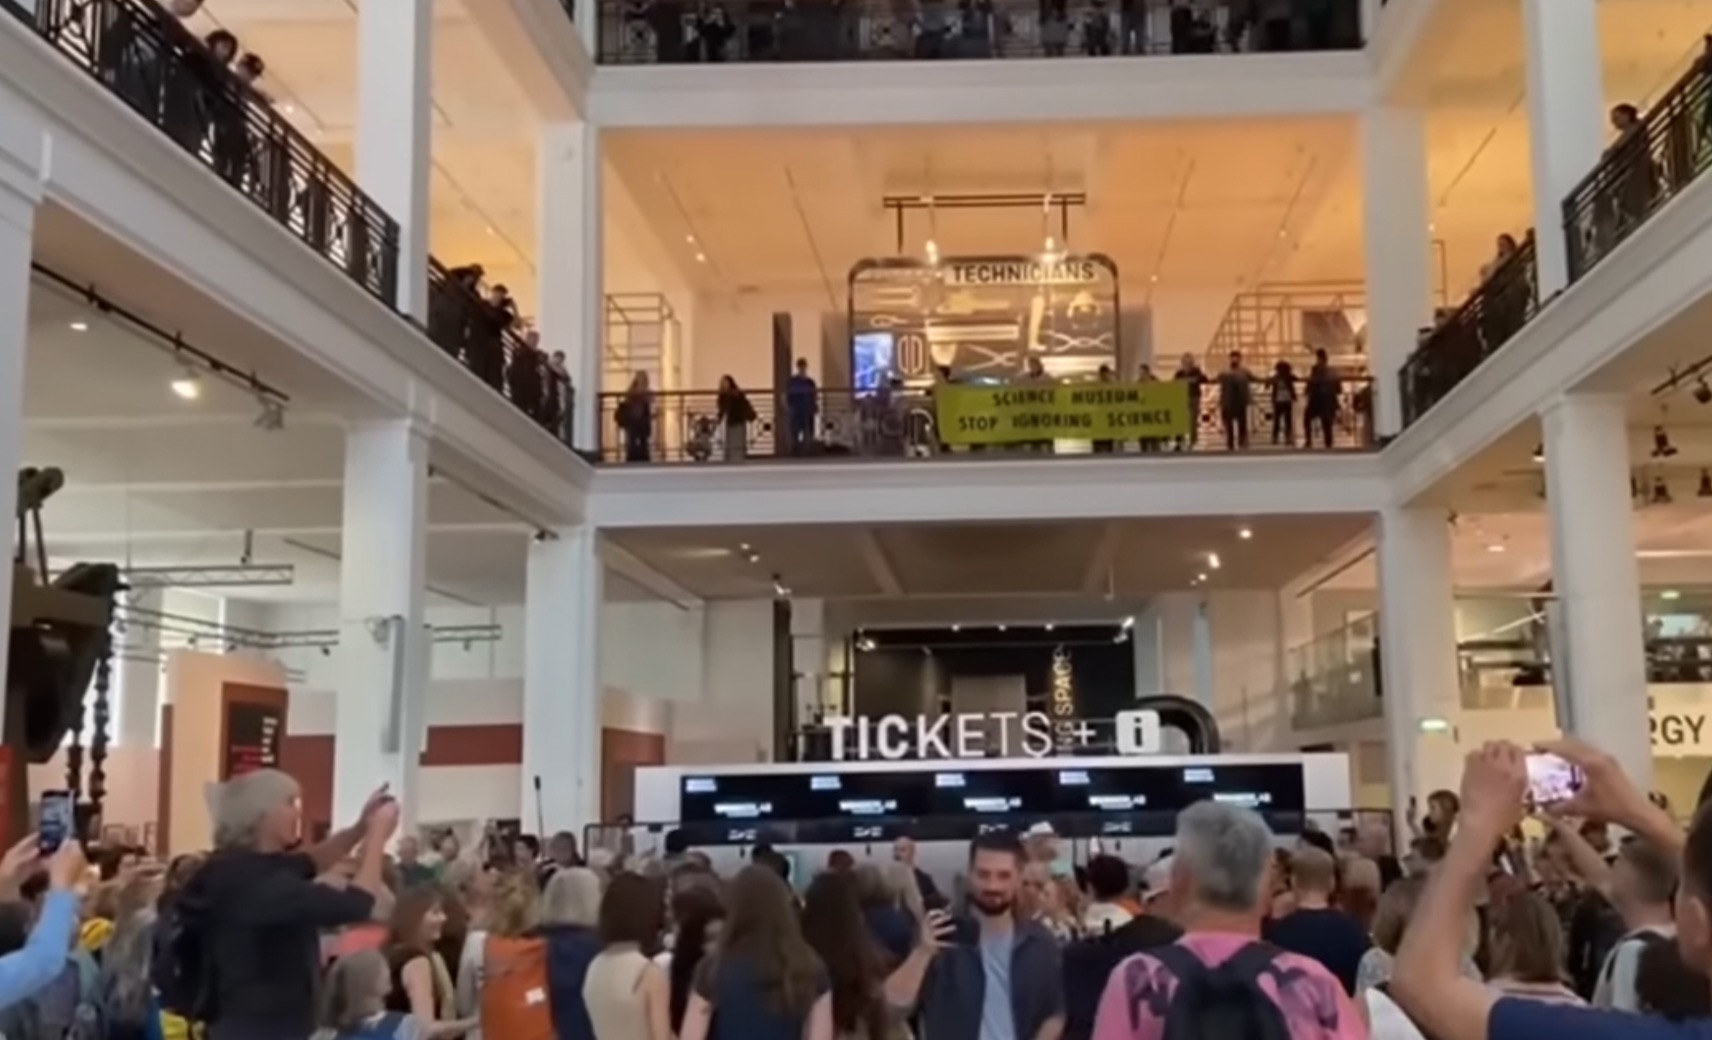 Flash mob at the Science Museum - The Climate Choir Movement